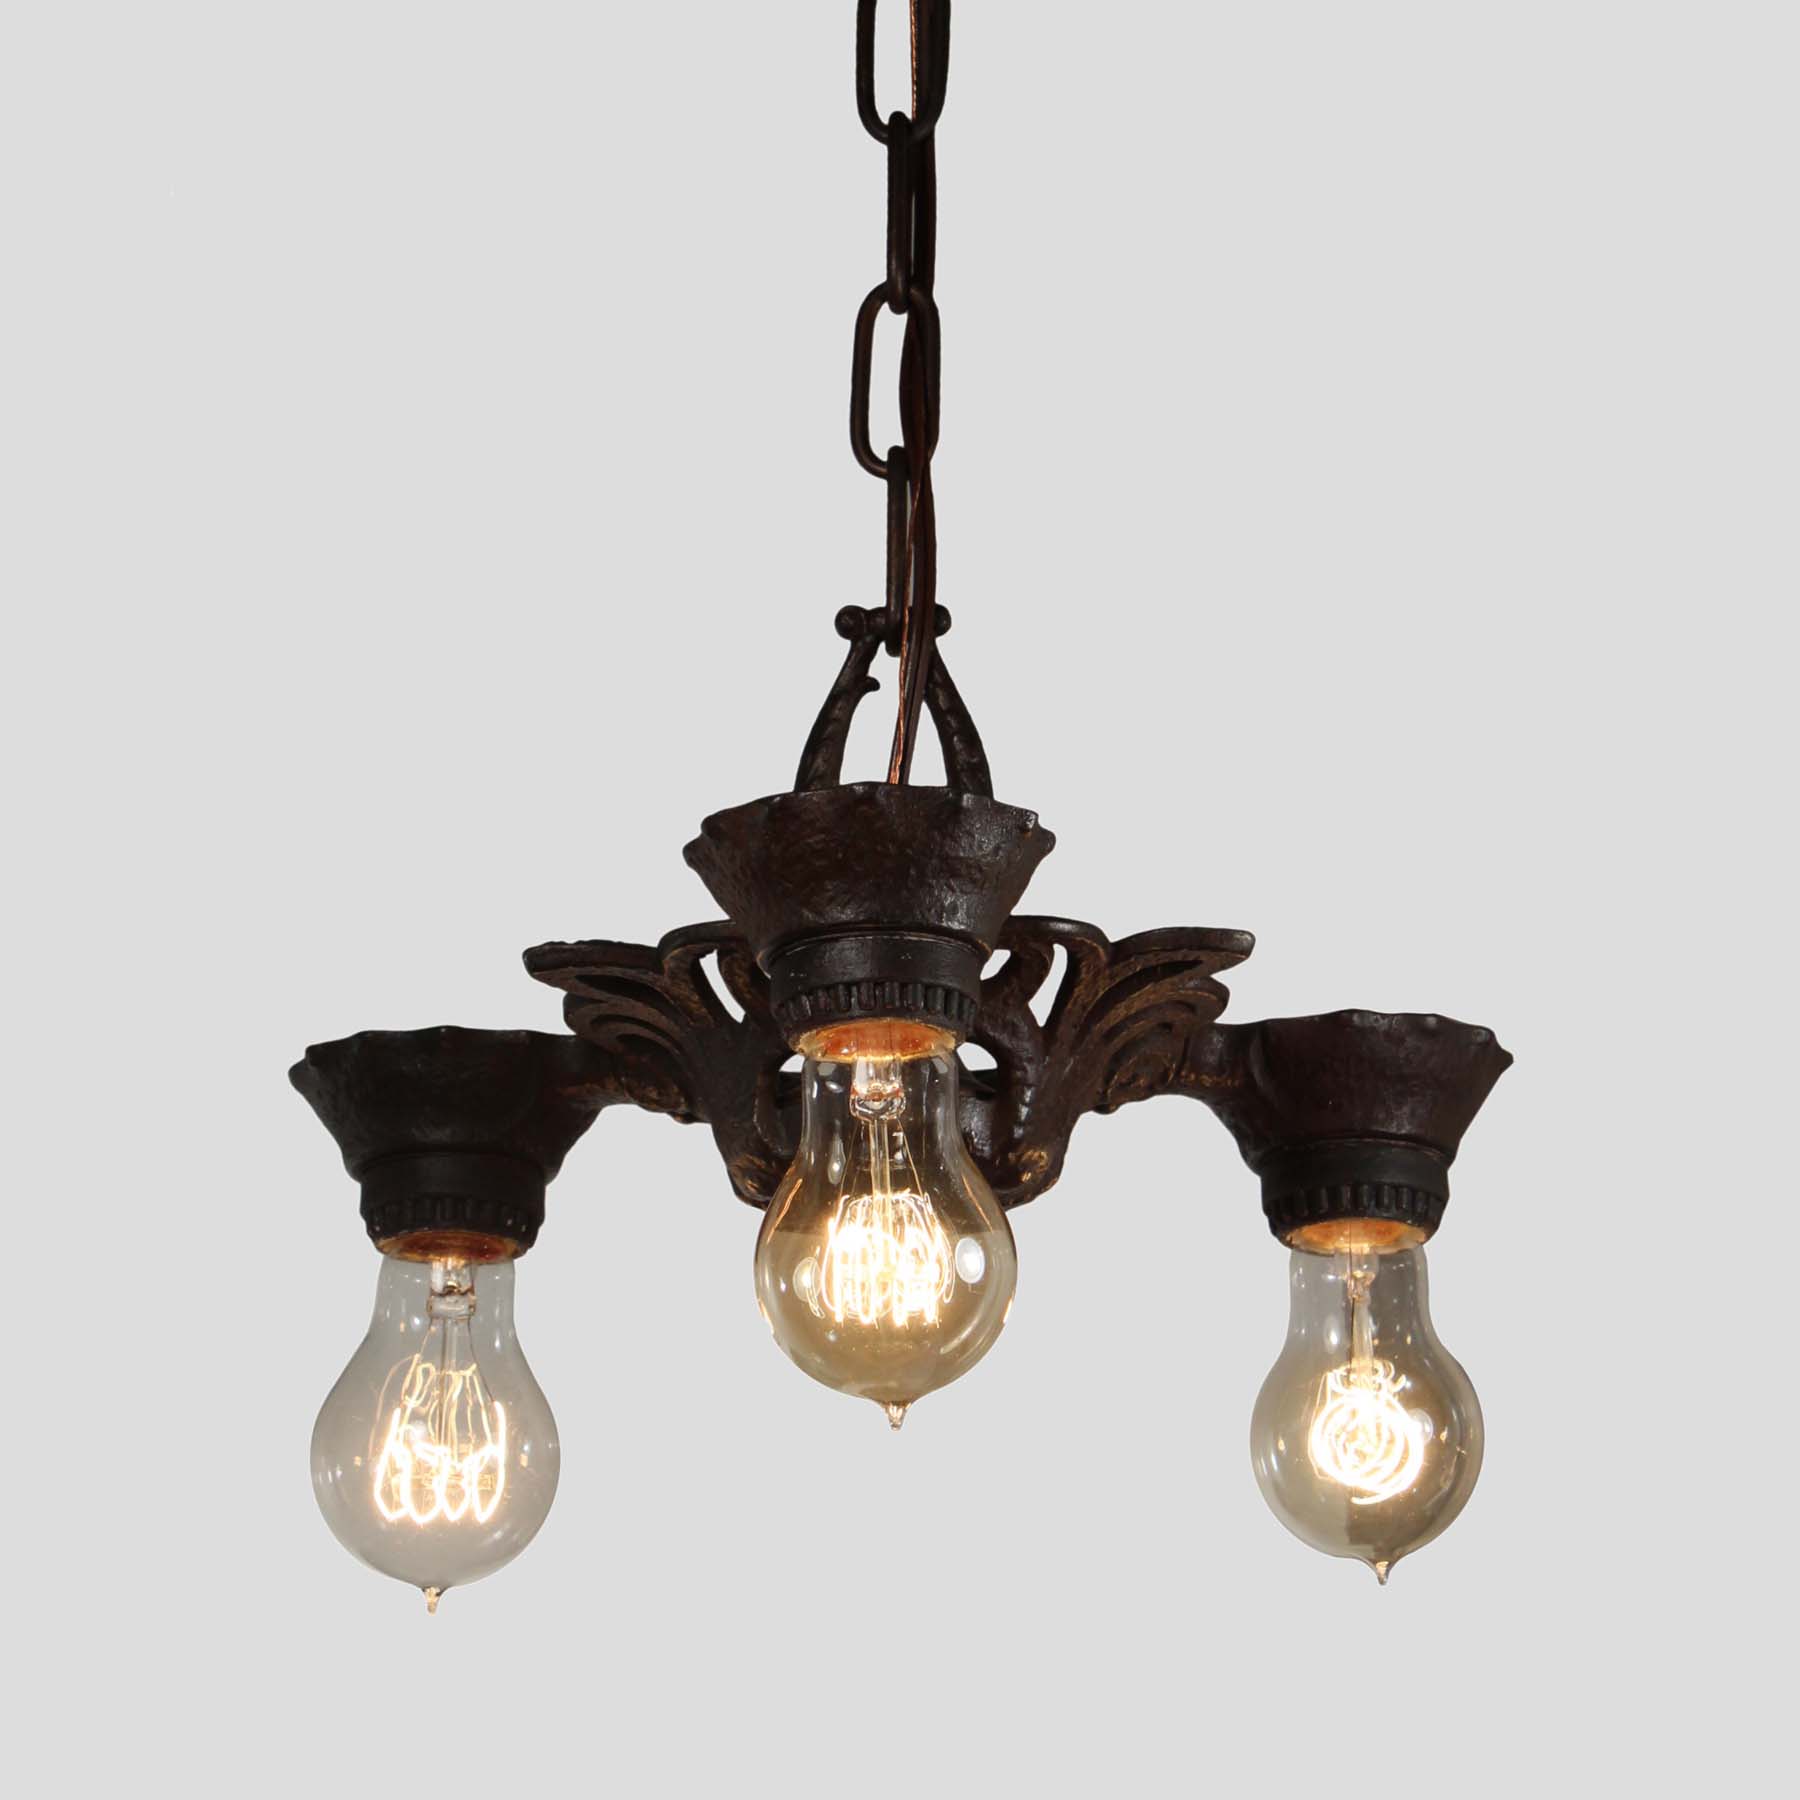 SOLD Antique Three-Light Chandelier with Exposed Bulbs-68004